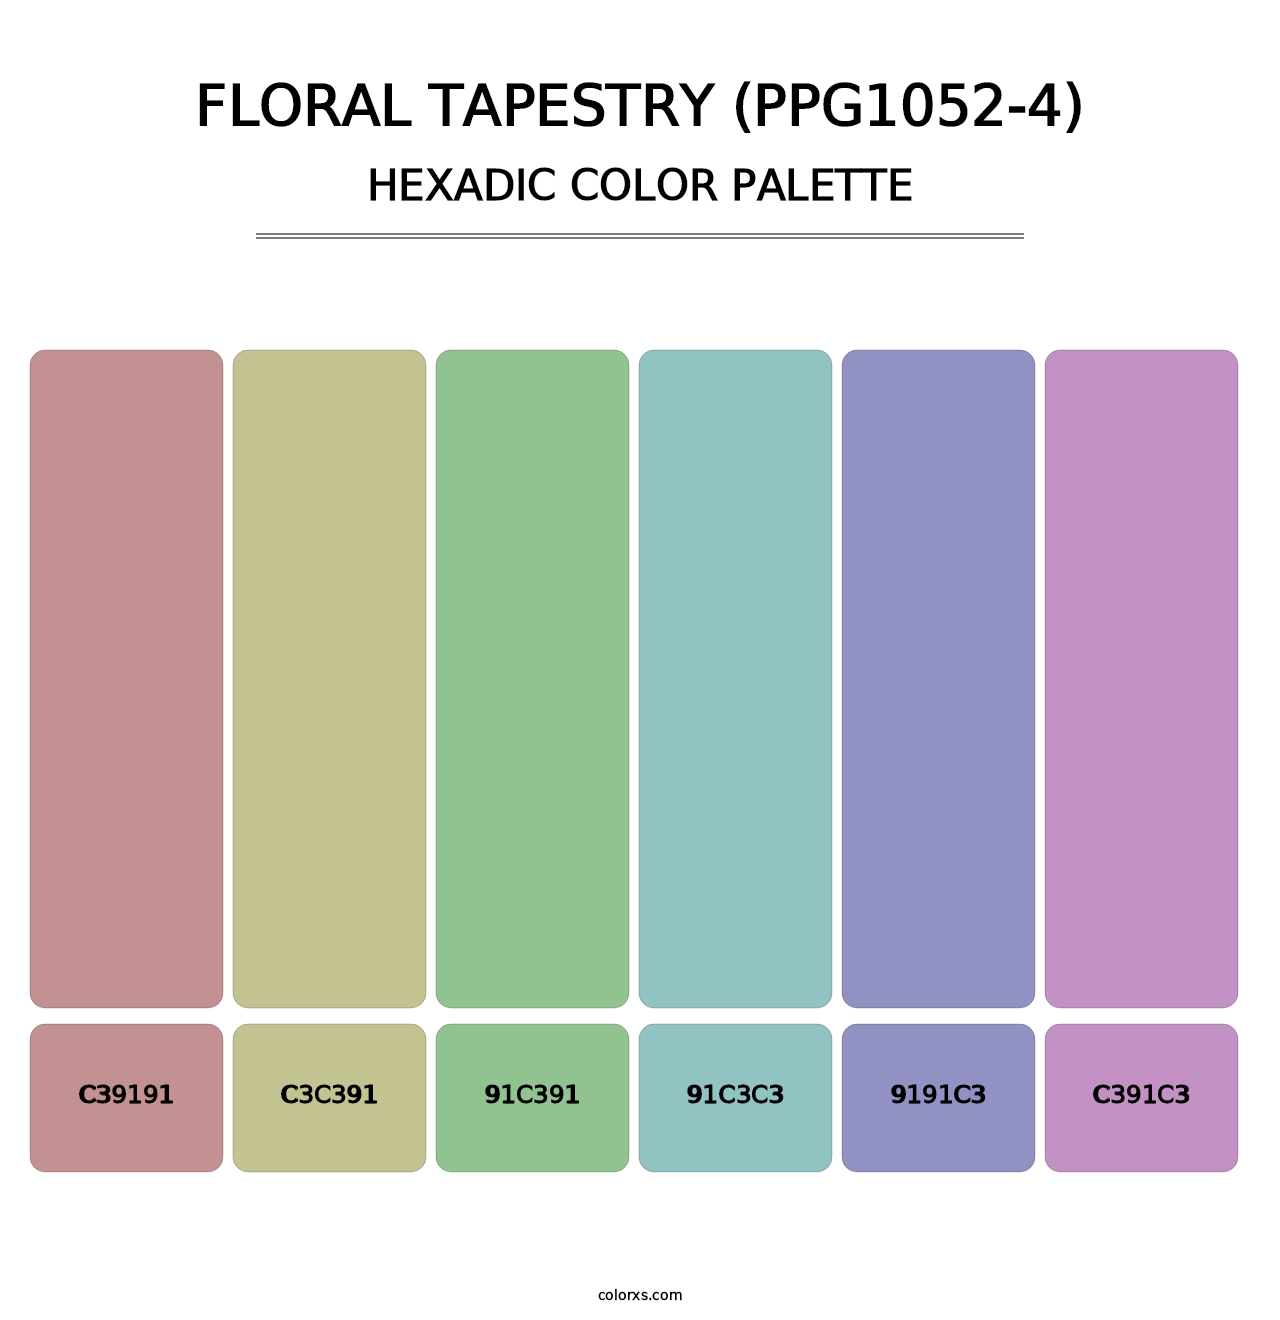 Floral Tapestry (PPG1052-4) - Hexadic Color Palette